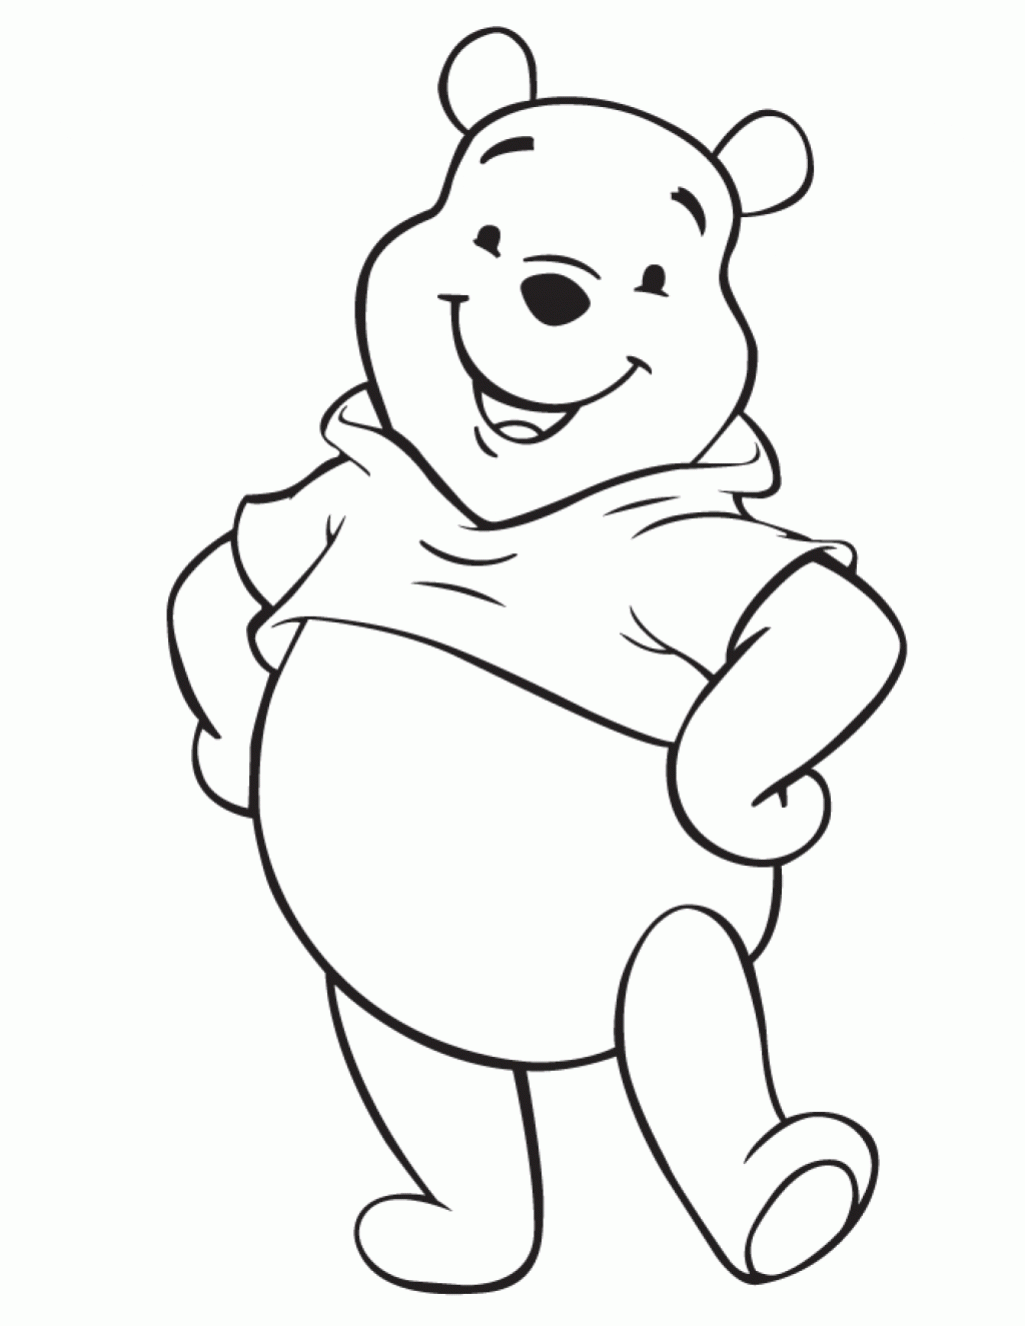 Cute Cartoon Characters Coloring Pages - Coloring Home